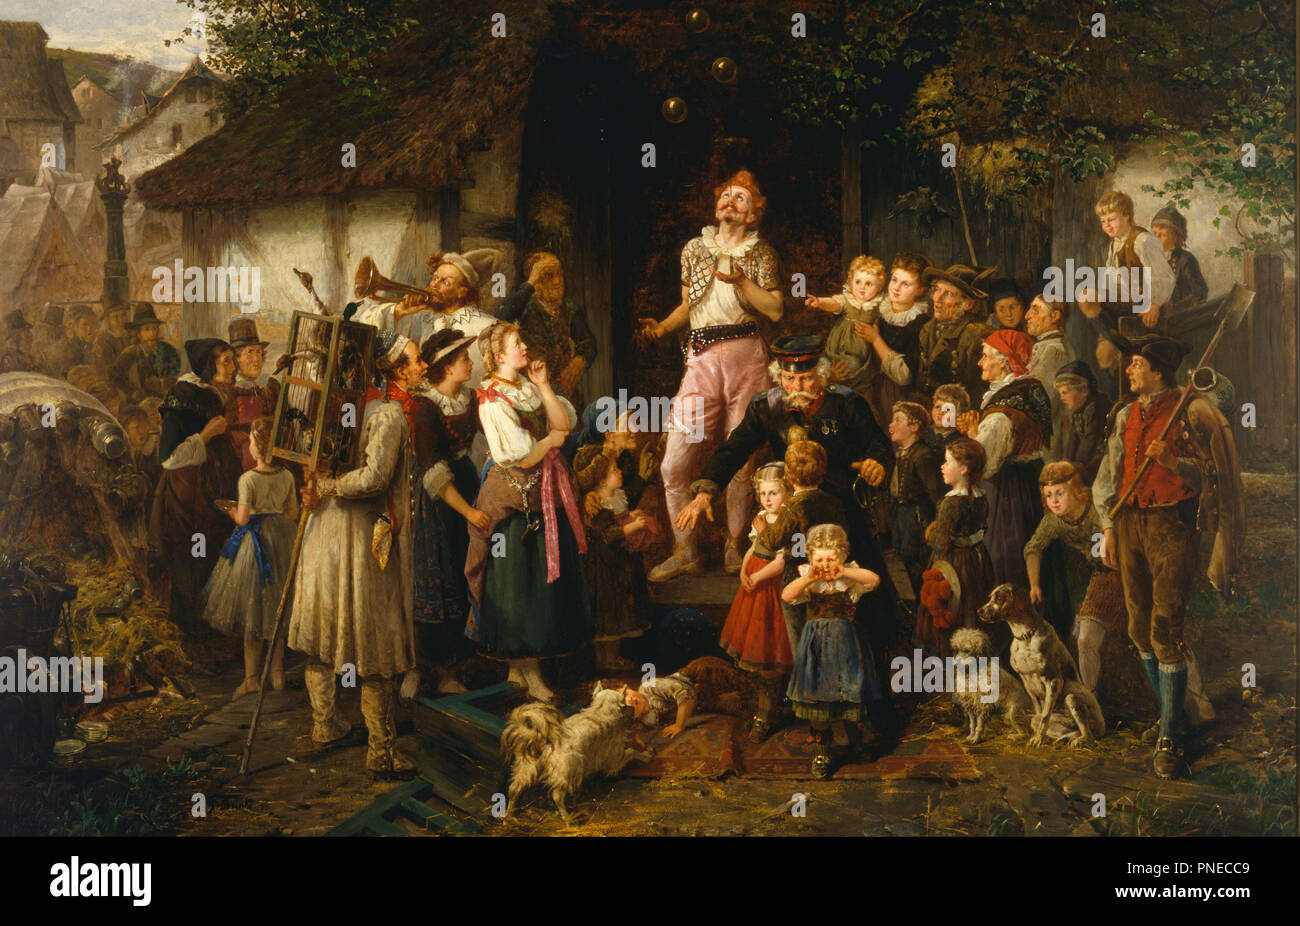 The juggler: a village fair. Date/Period: 1873. Painting. Oil on canvas. Height: 1,199 mm (47.20 in); Width: 1,849 mm (72.79 in). Author: FRITZ BEINKE. BEINKE, FRITZ. Stock Photo